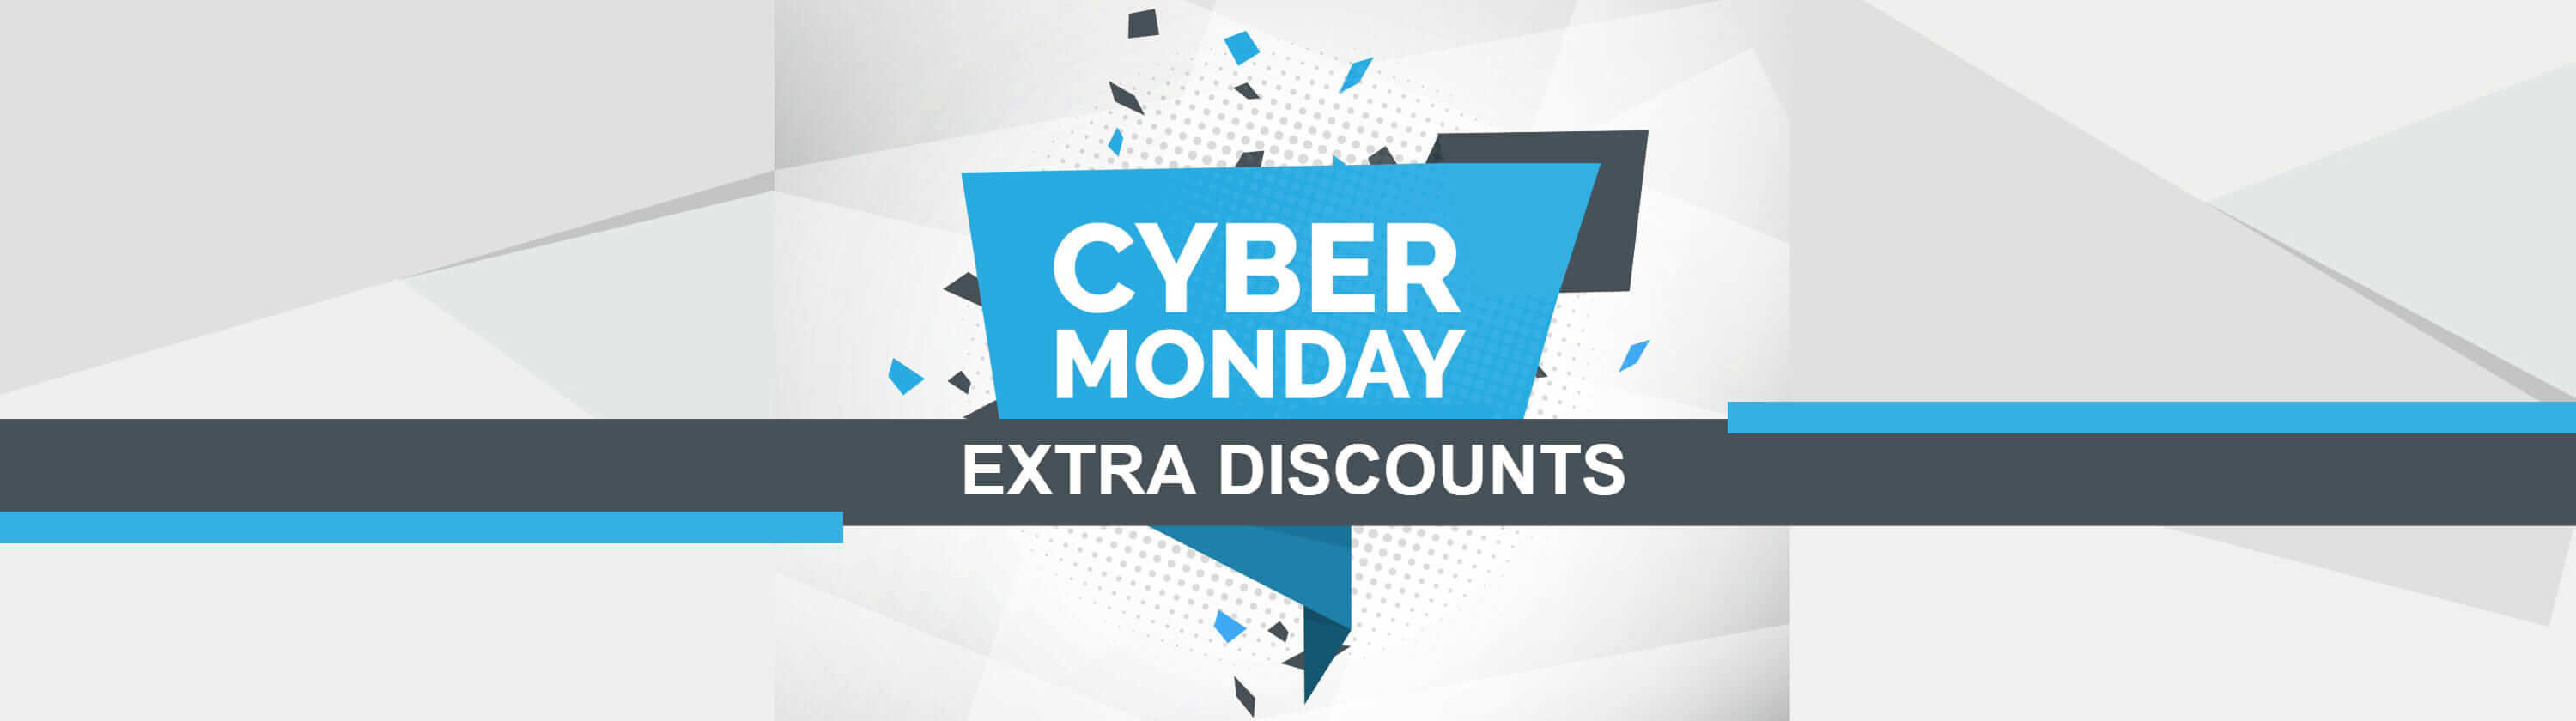 Cyber Monday Extra Discounts!